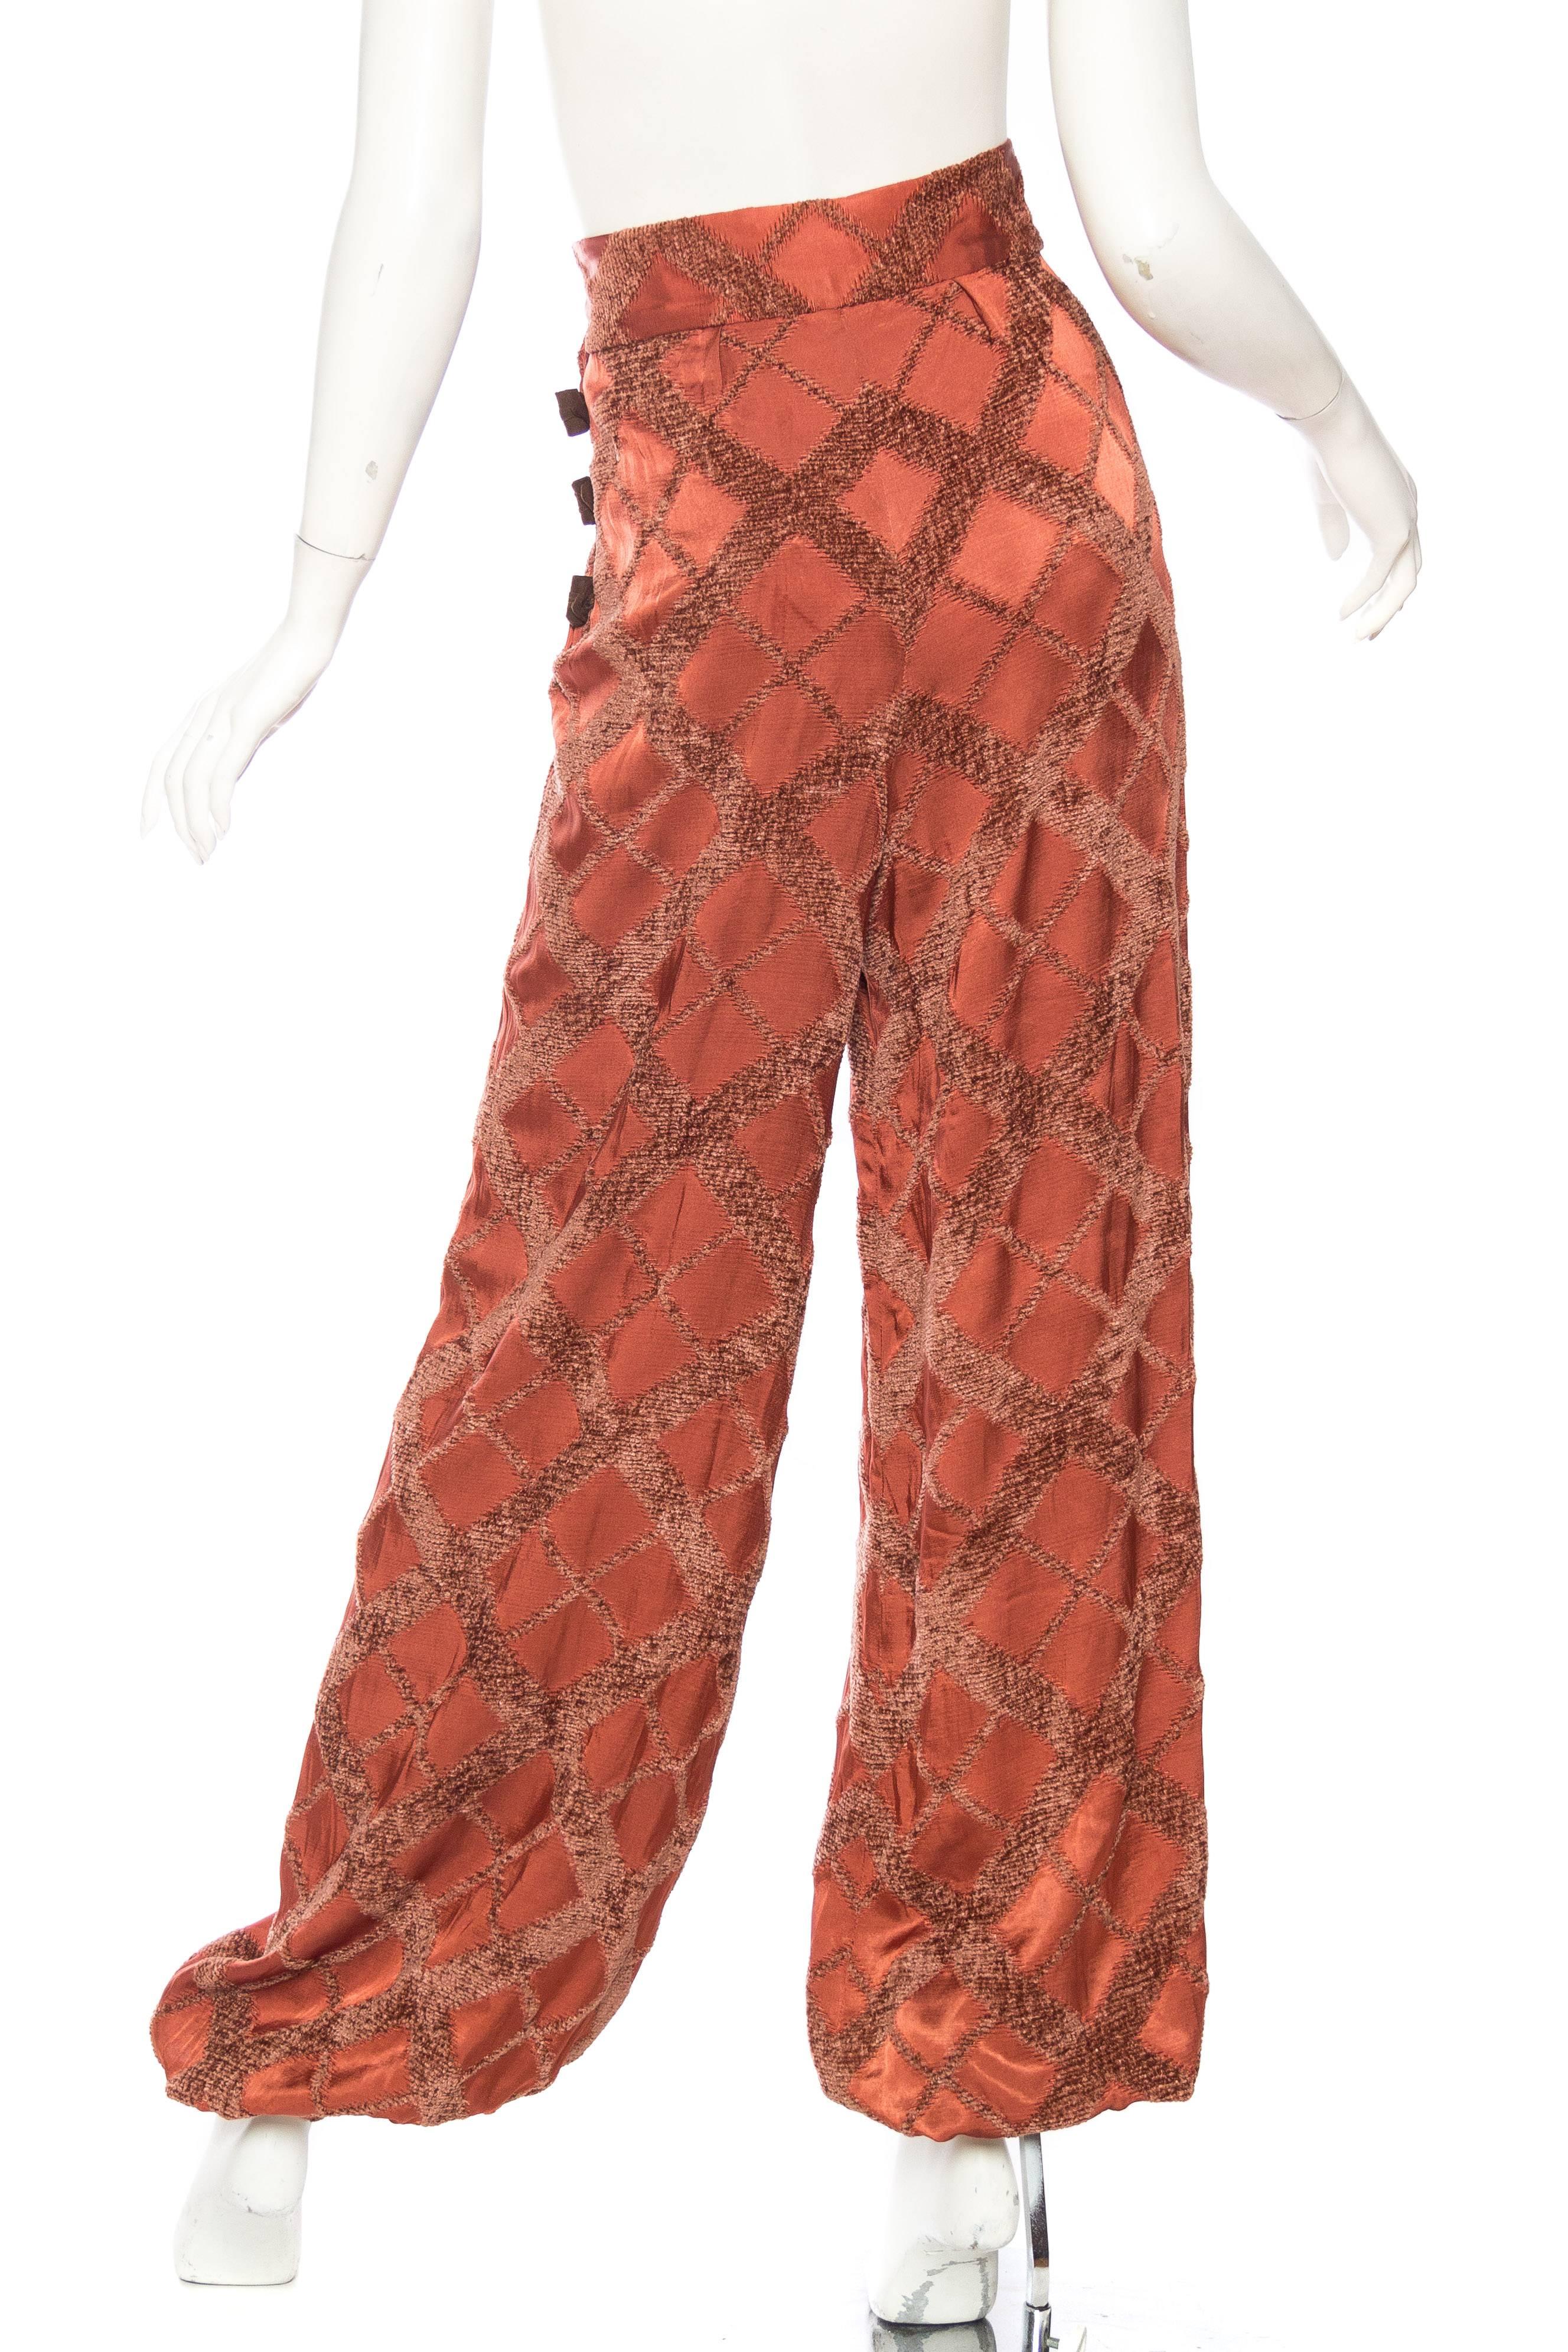 Women's 1930S Russet Brown Rayon Blend Satin & Chenille Harem Pants With Leather Toggles